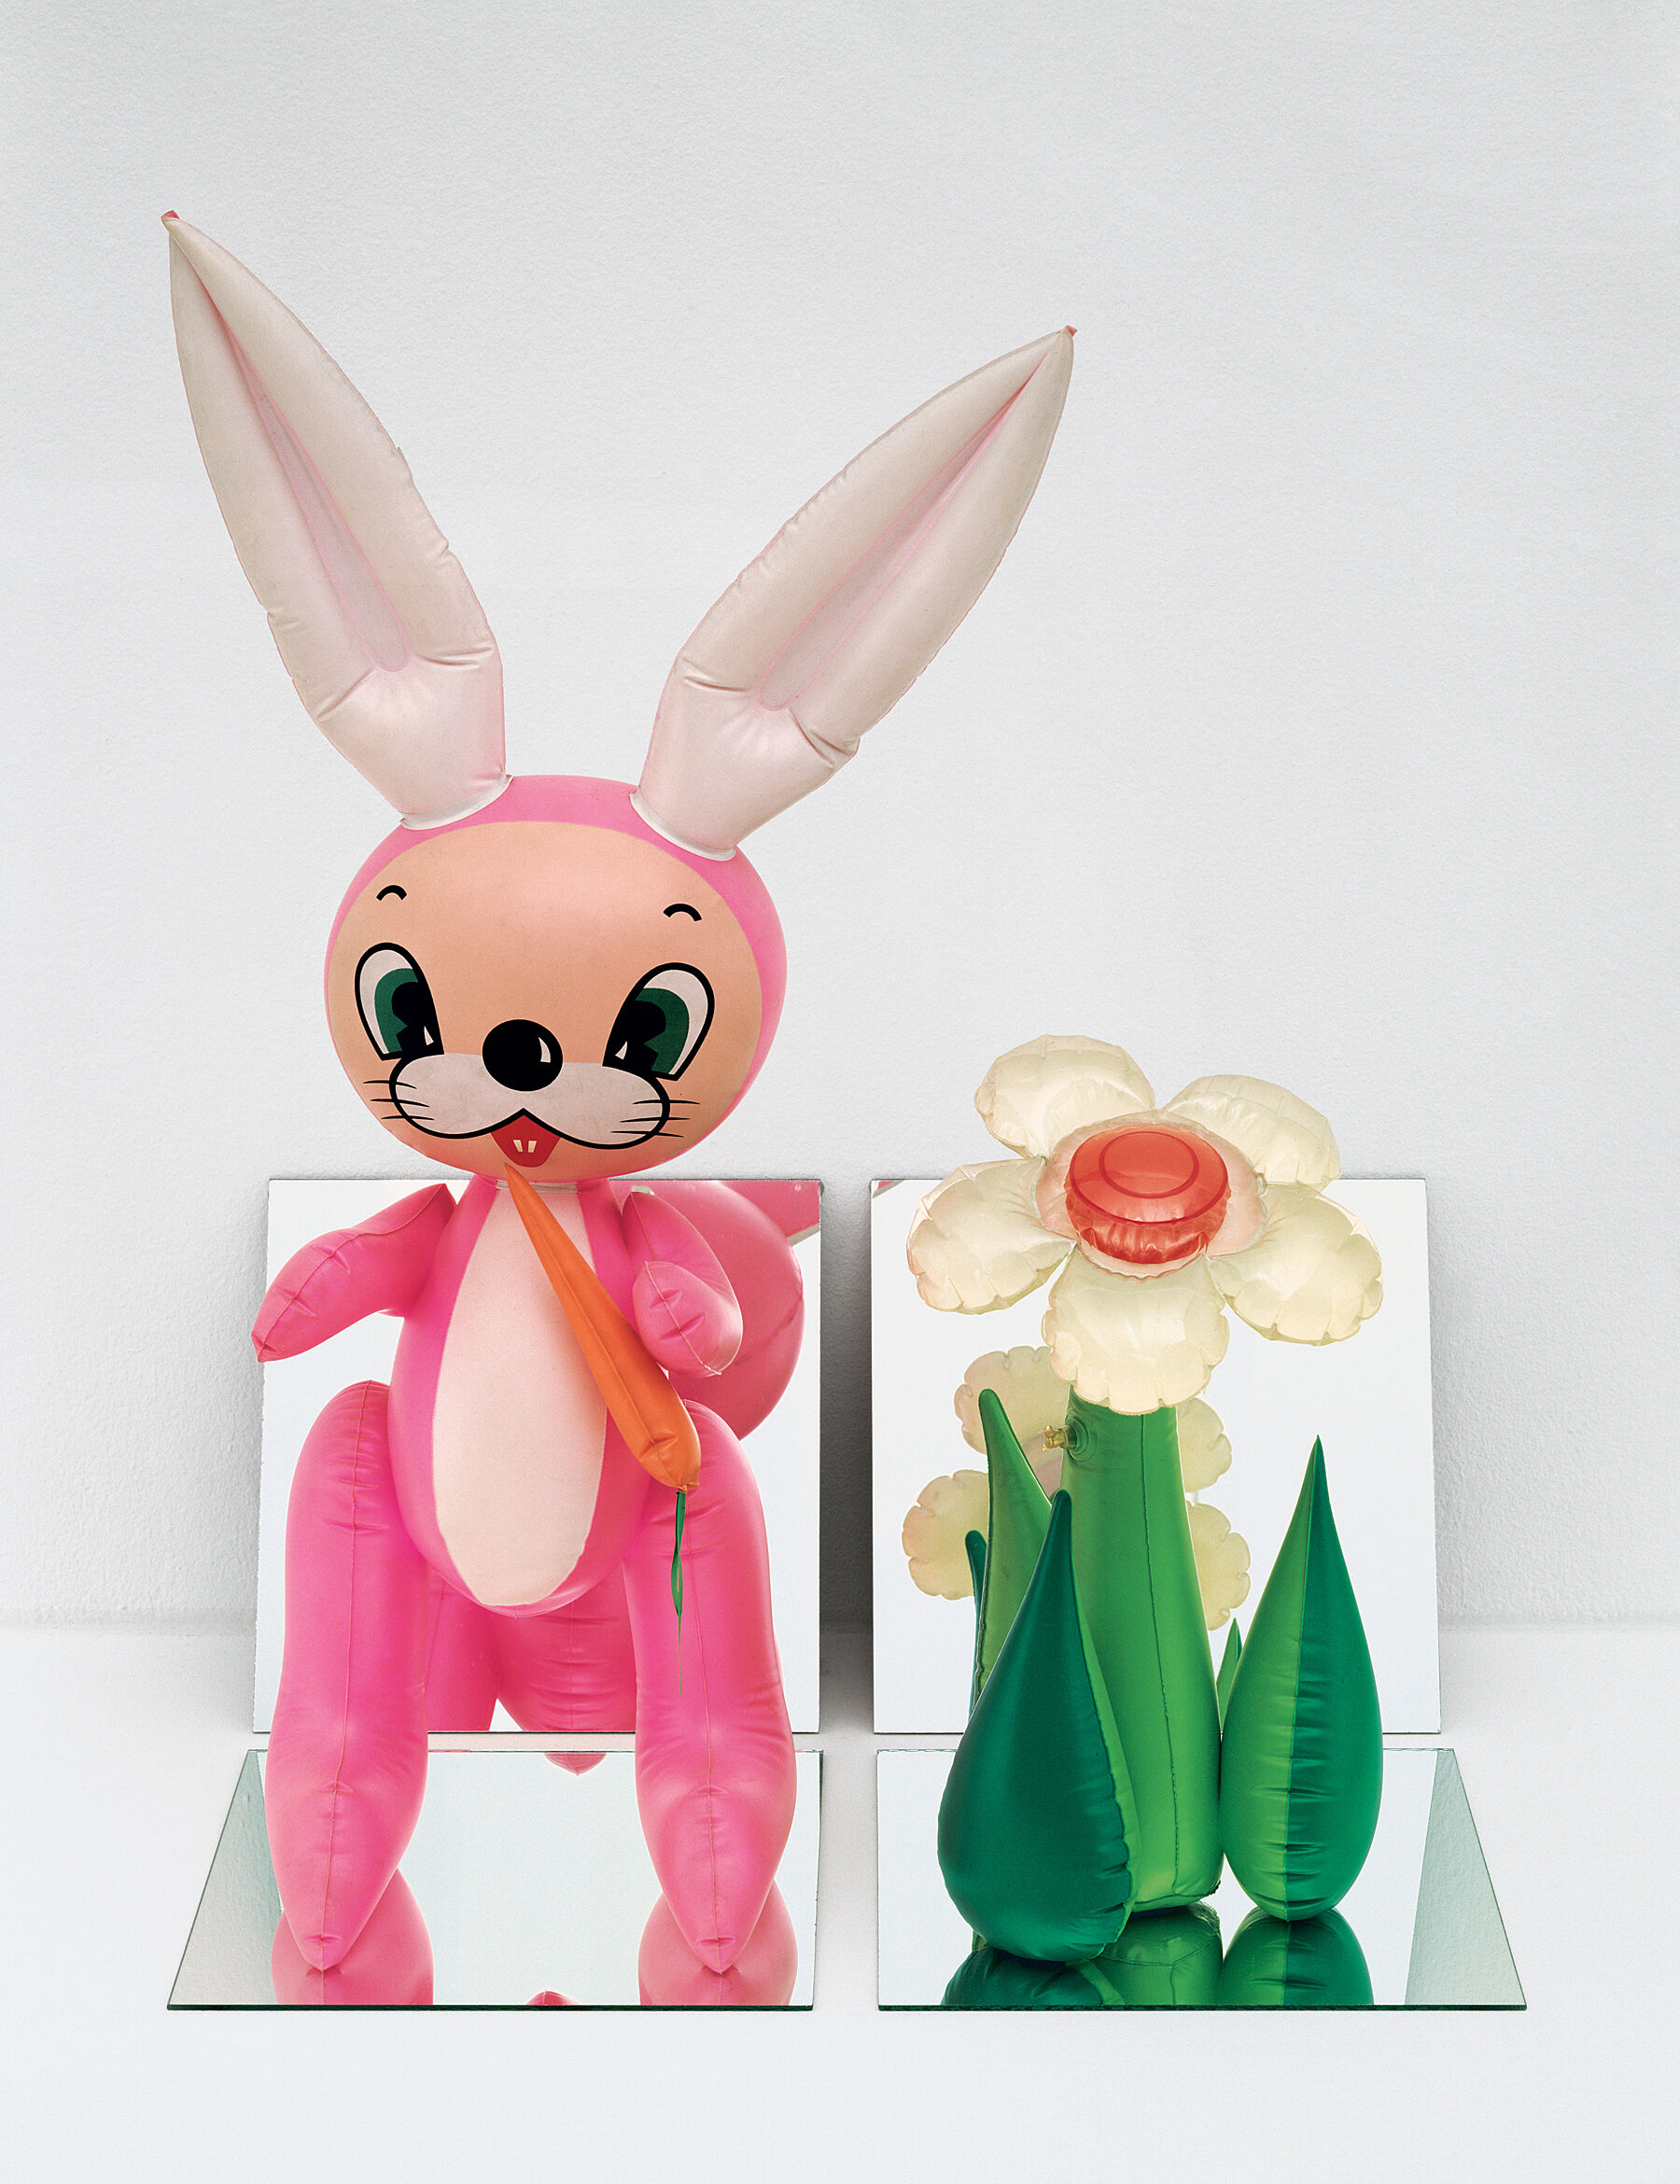 A cartoonish inflatable bunny and flower.